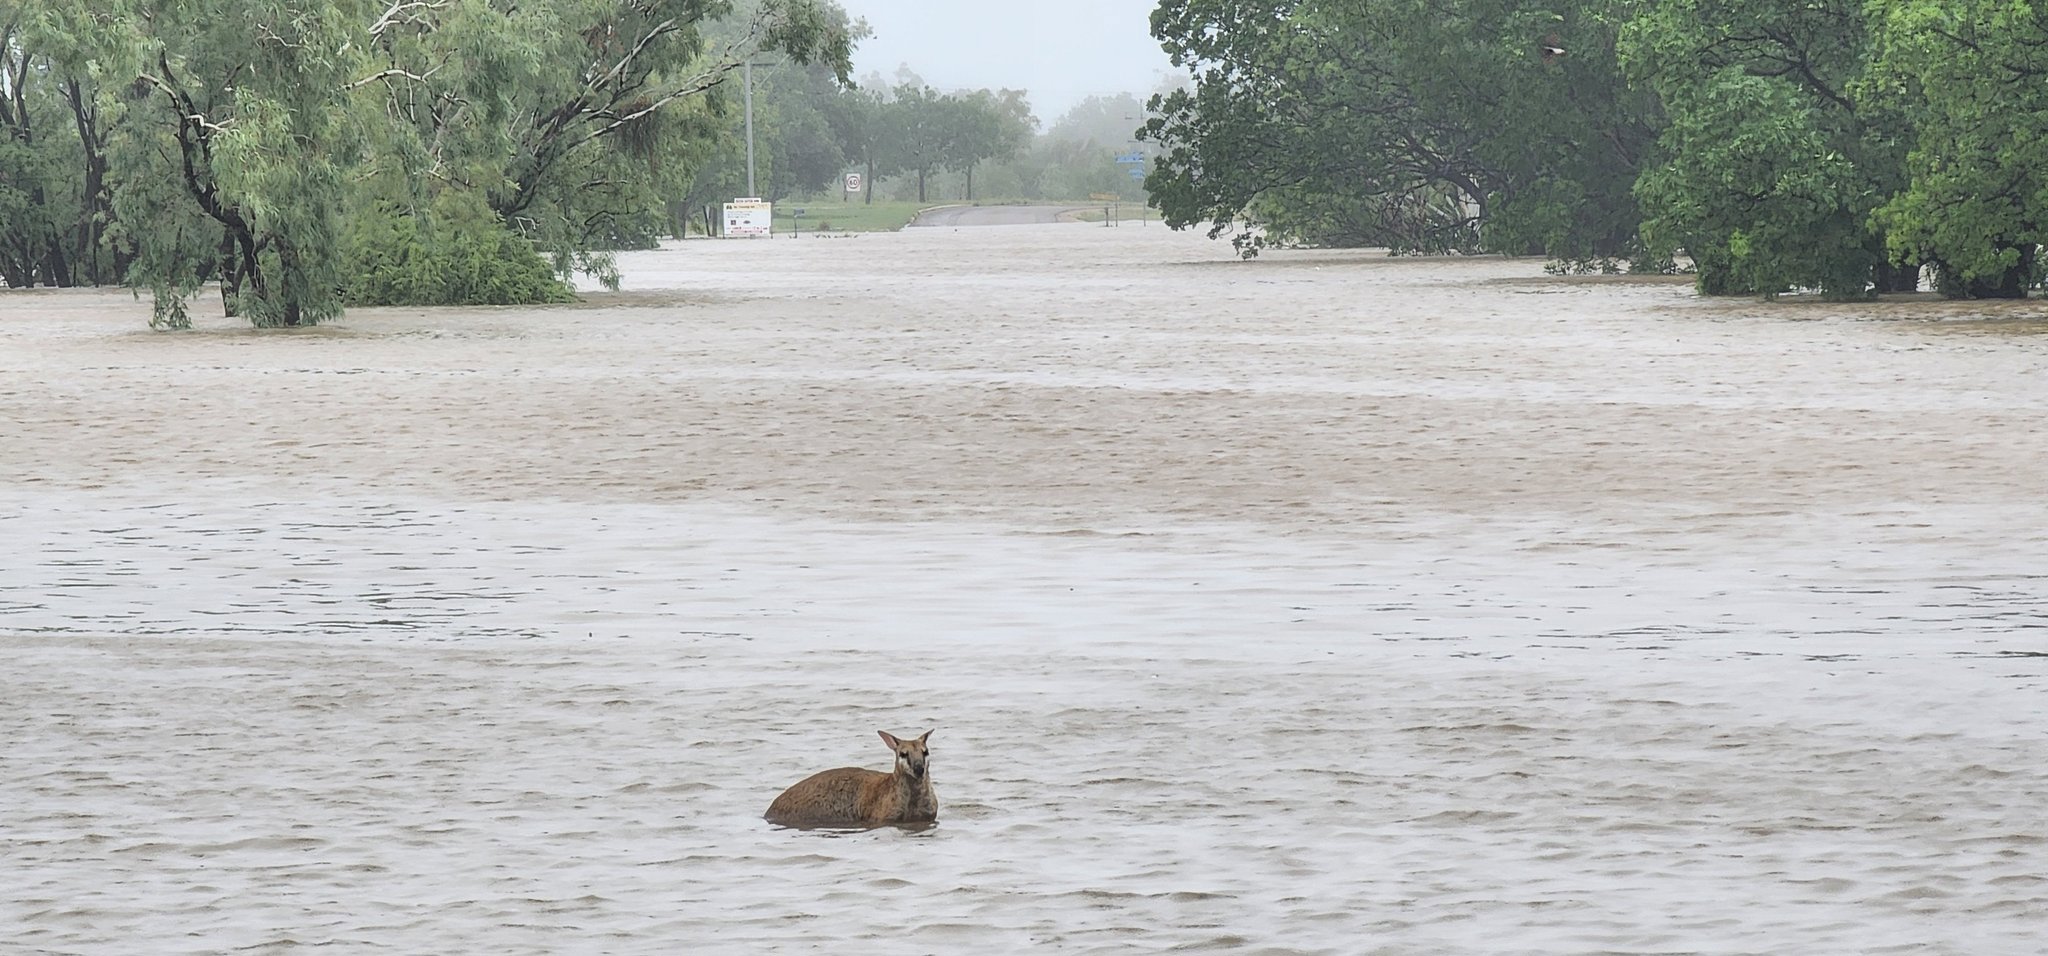 Fitzroy Crossing is one if the areas hardest hit, animals have been seen trying to flee the floodwater.